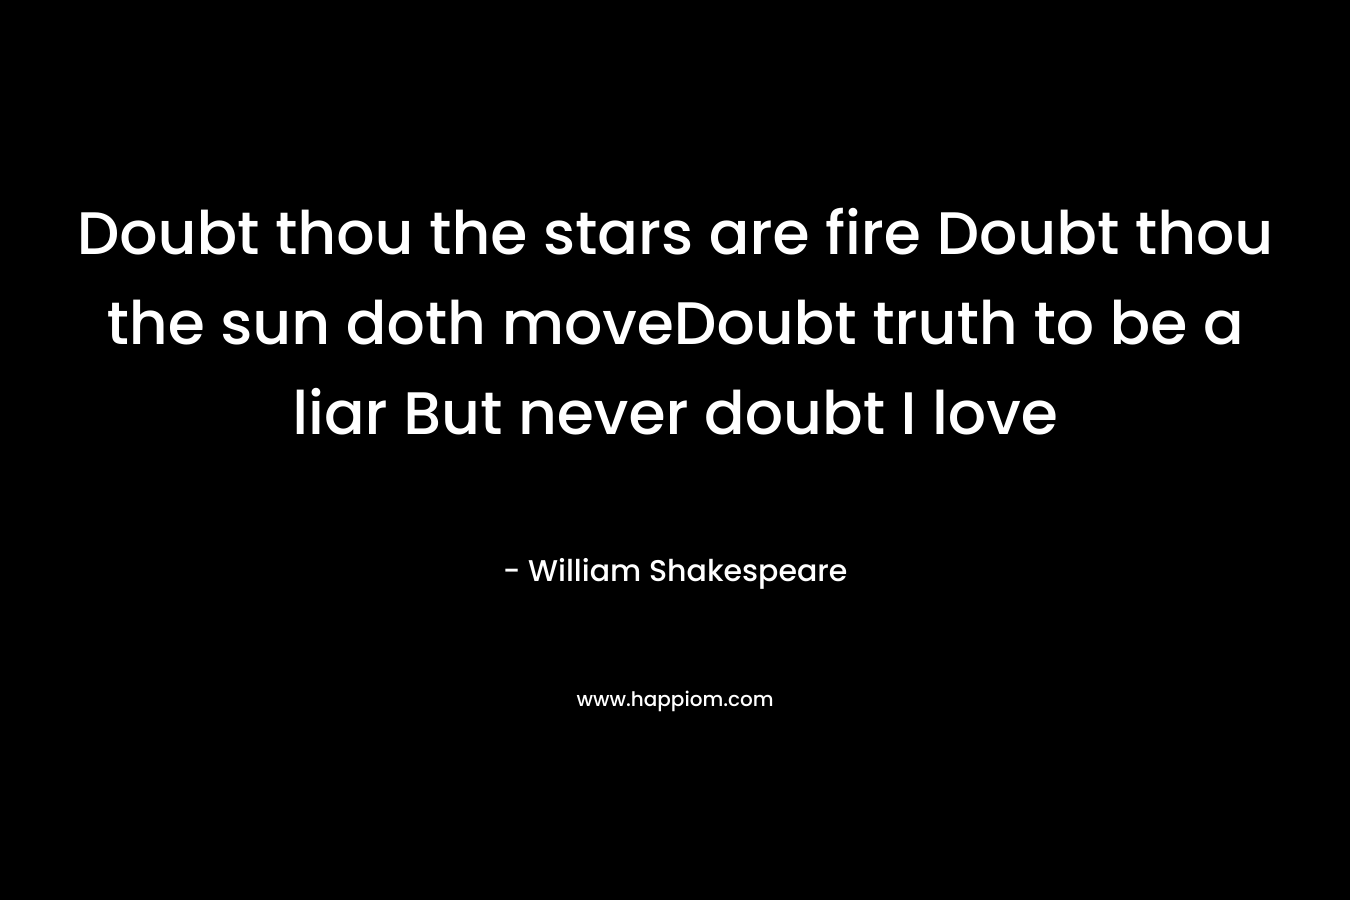 Doubt thou the stars are fire Doubt thou the sun doth moveDoubt truth to be a liar But never doubt I love – William Shakespeare